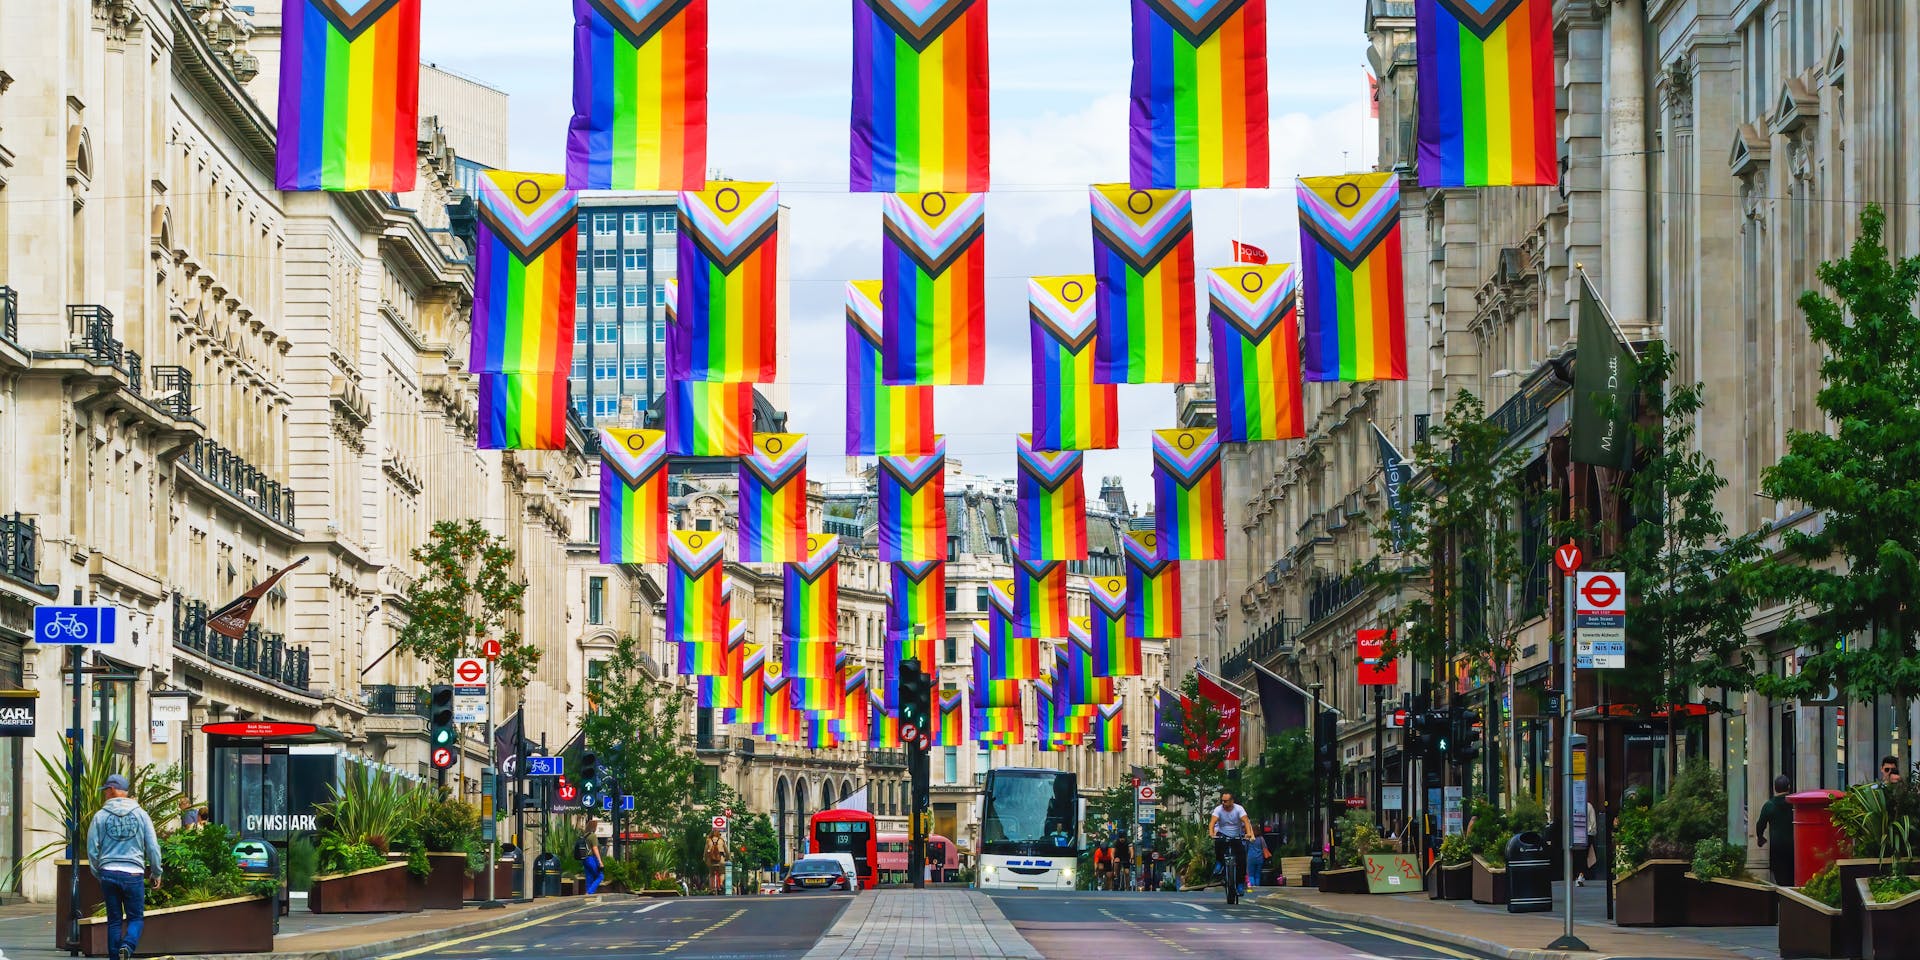 Why outside experts are worried about the decline of LGBTI rights in the UK